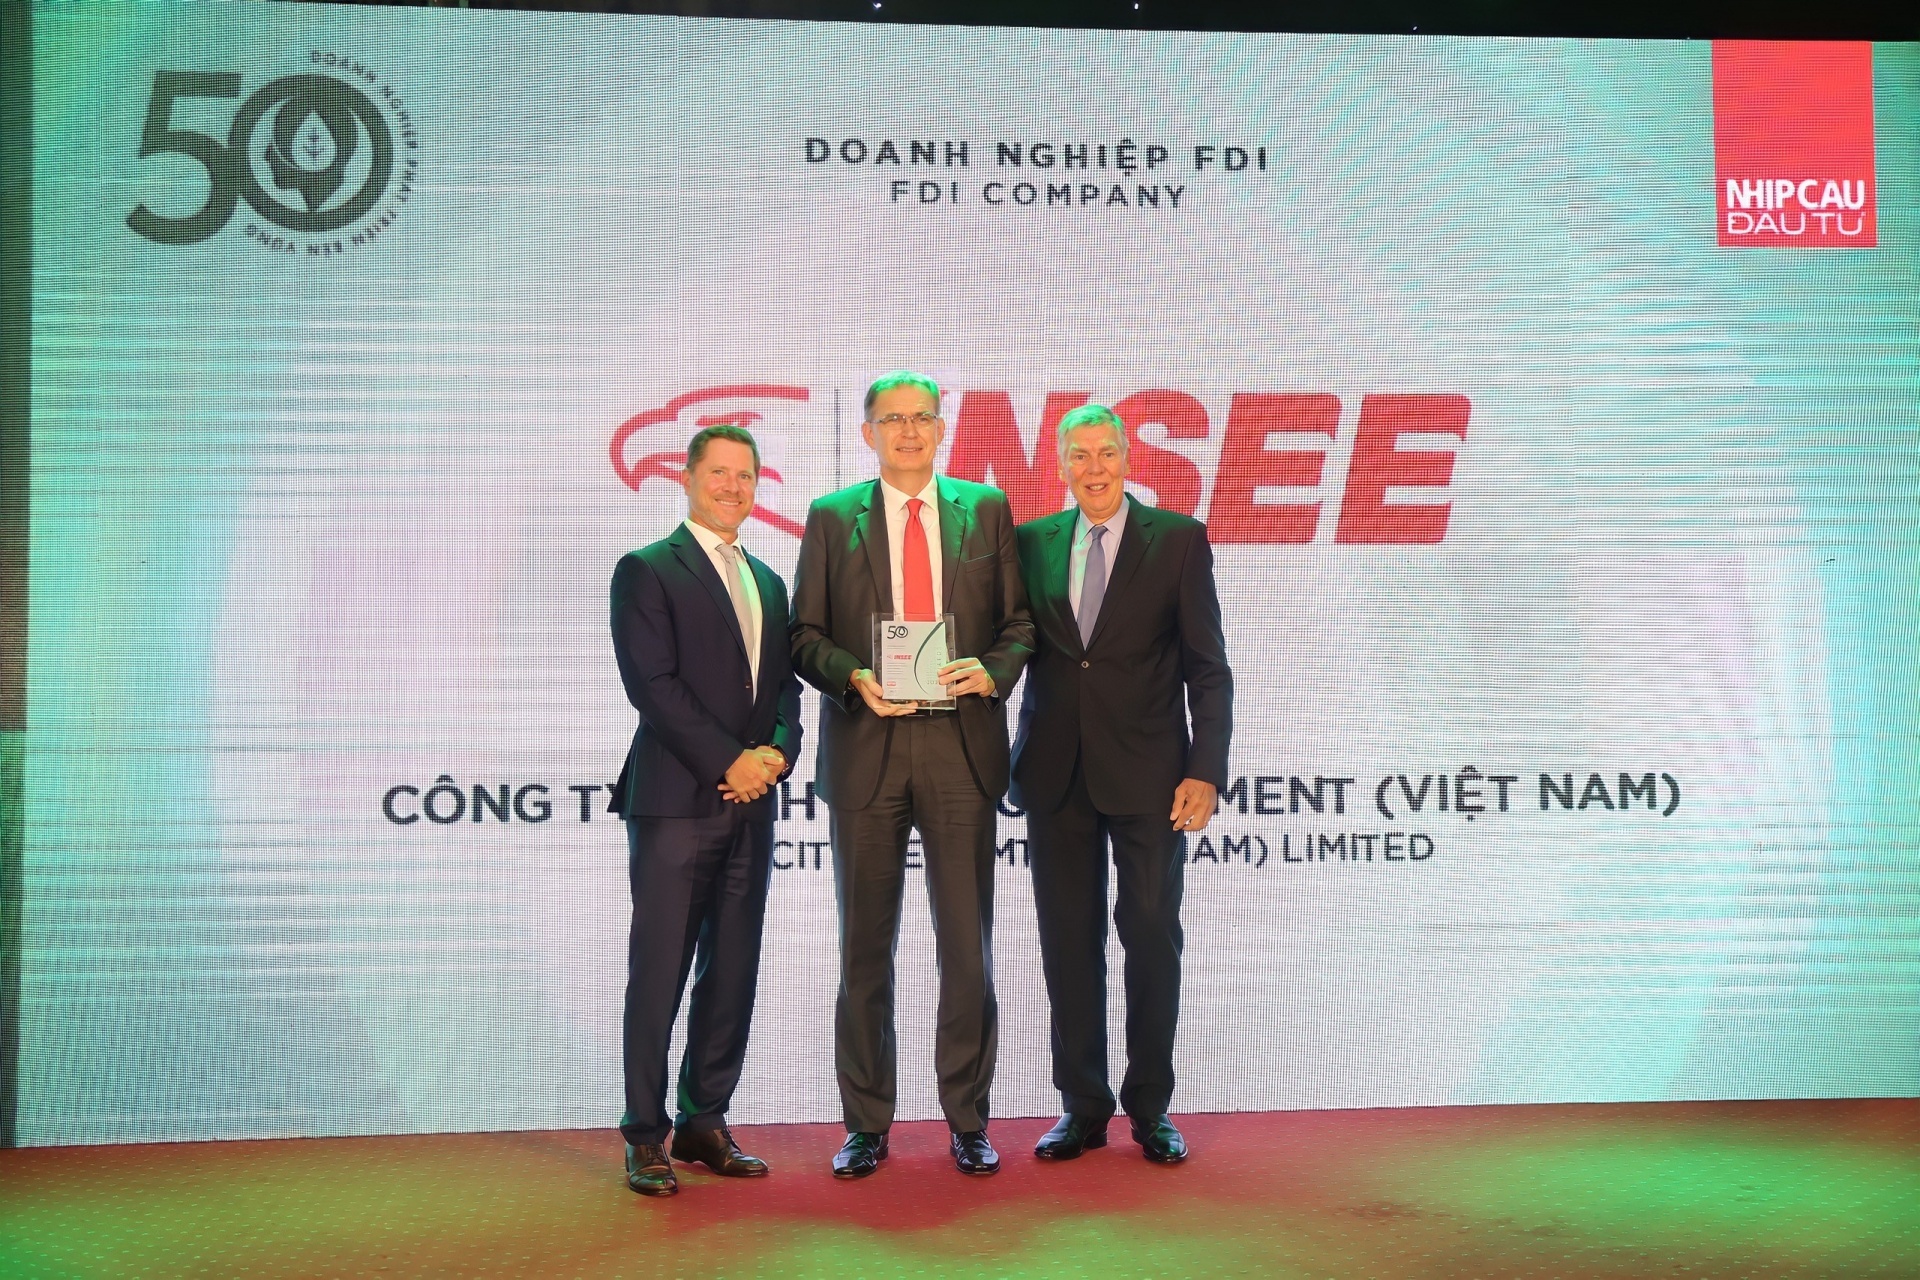 INSEE Vietnam champion in 2022 Top 50 Corporate Sustainability Awards